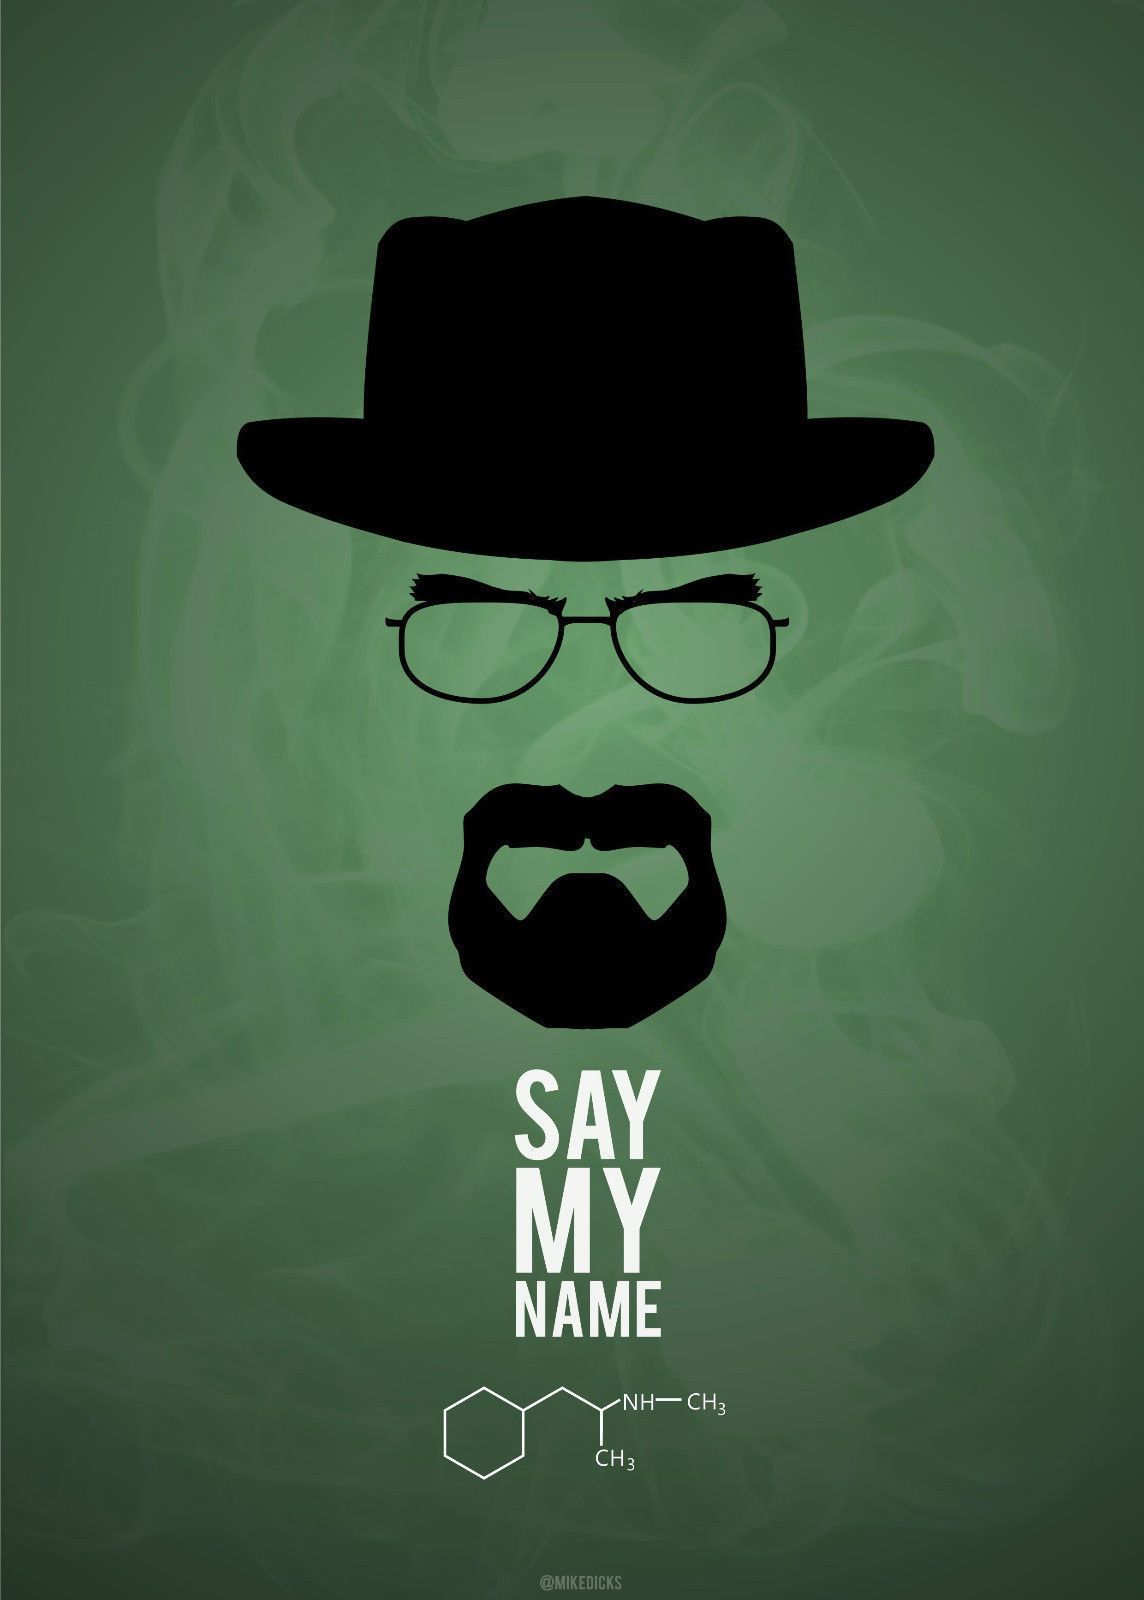 Breaking Bad Quotes TV Play Silk Poster Large Print 13x24 24x43 inch 